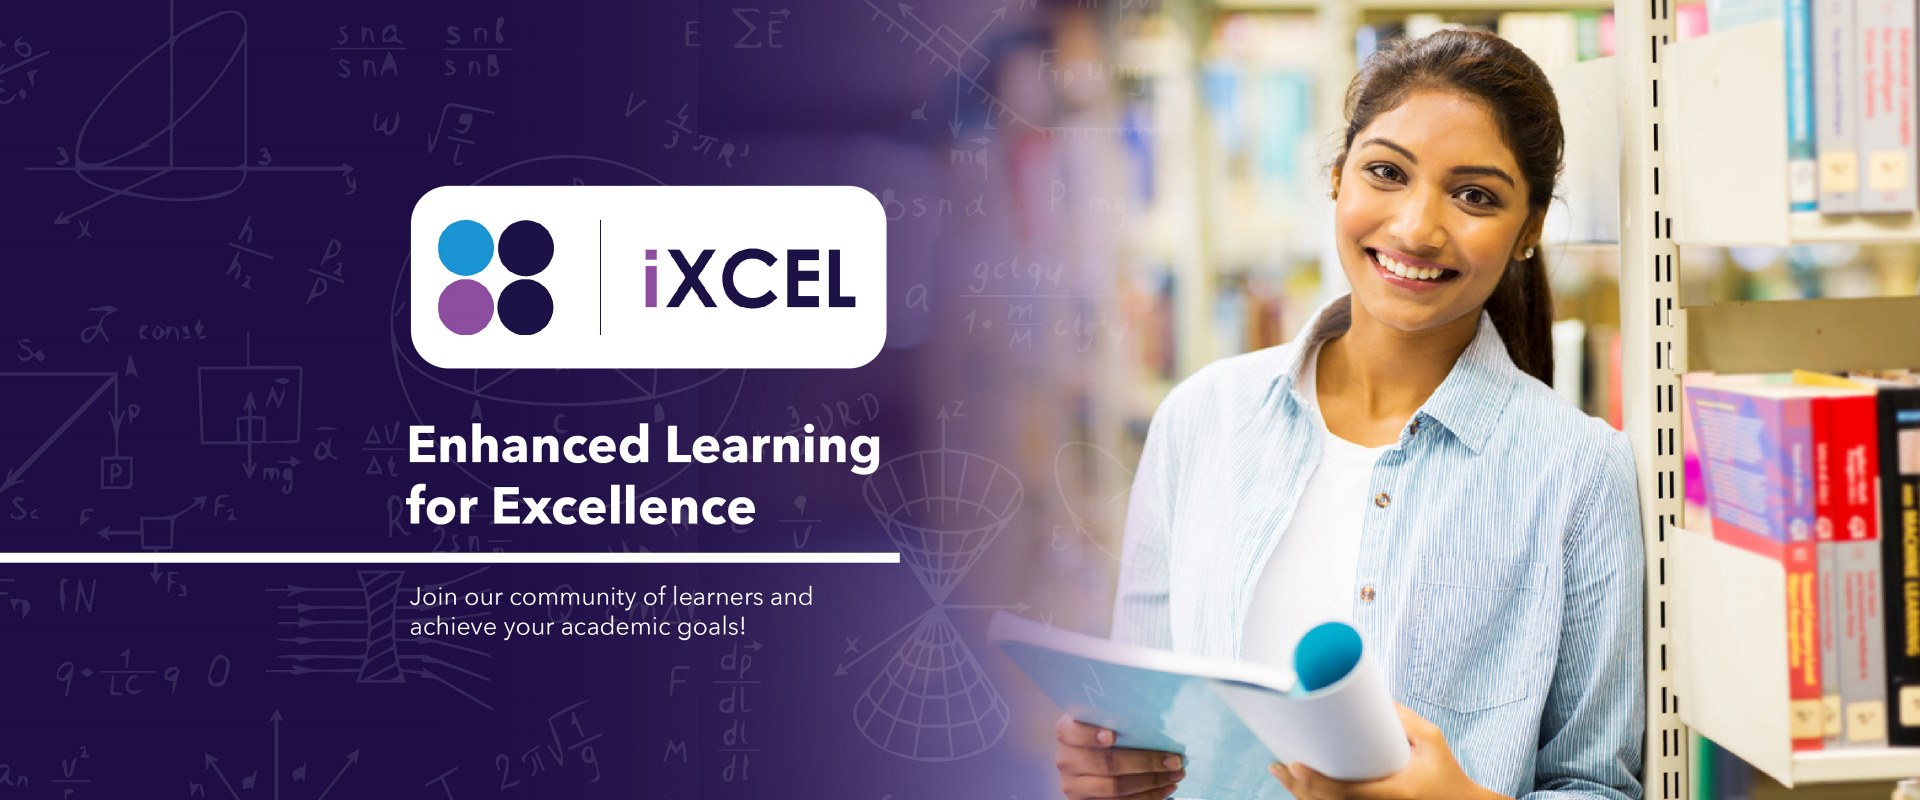 A banner for enhanced learning for excellence